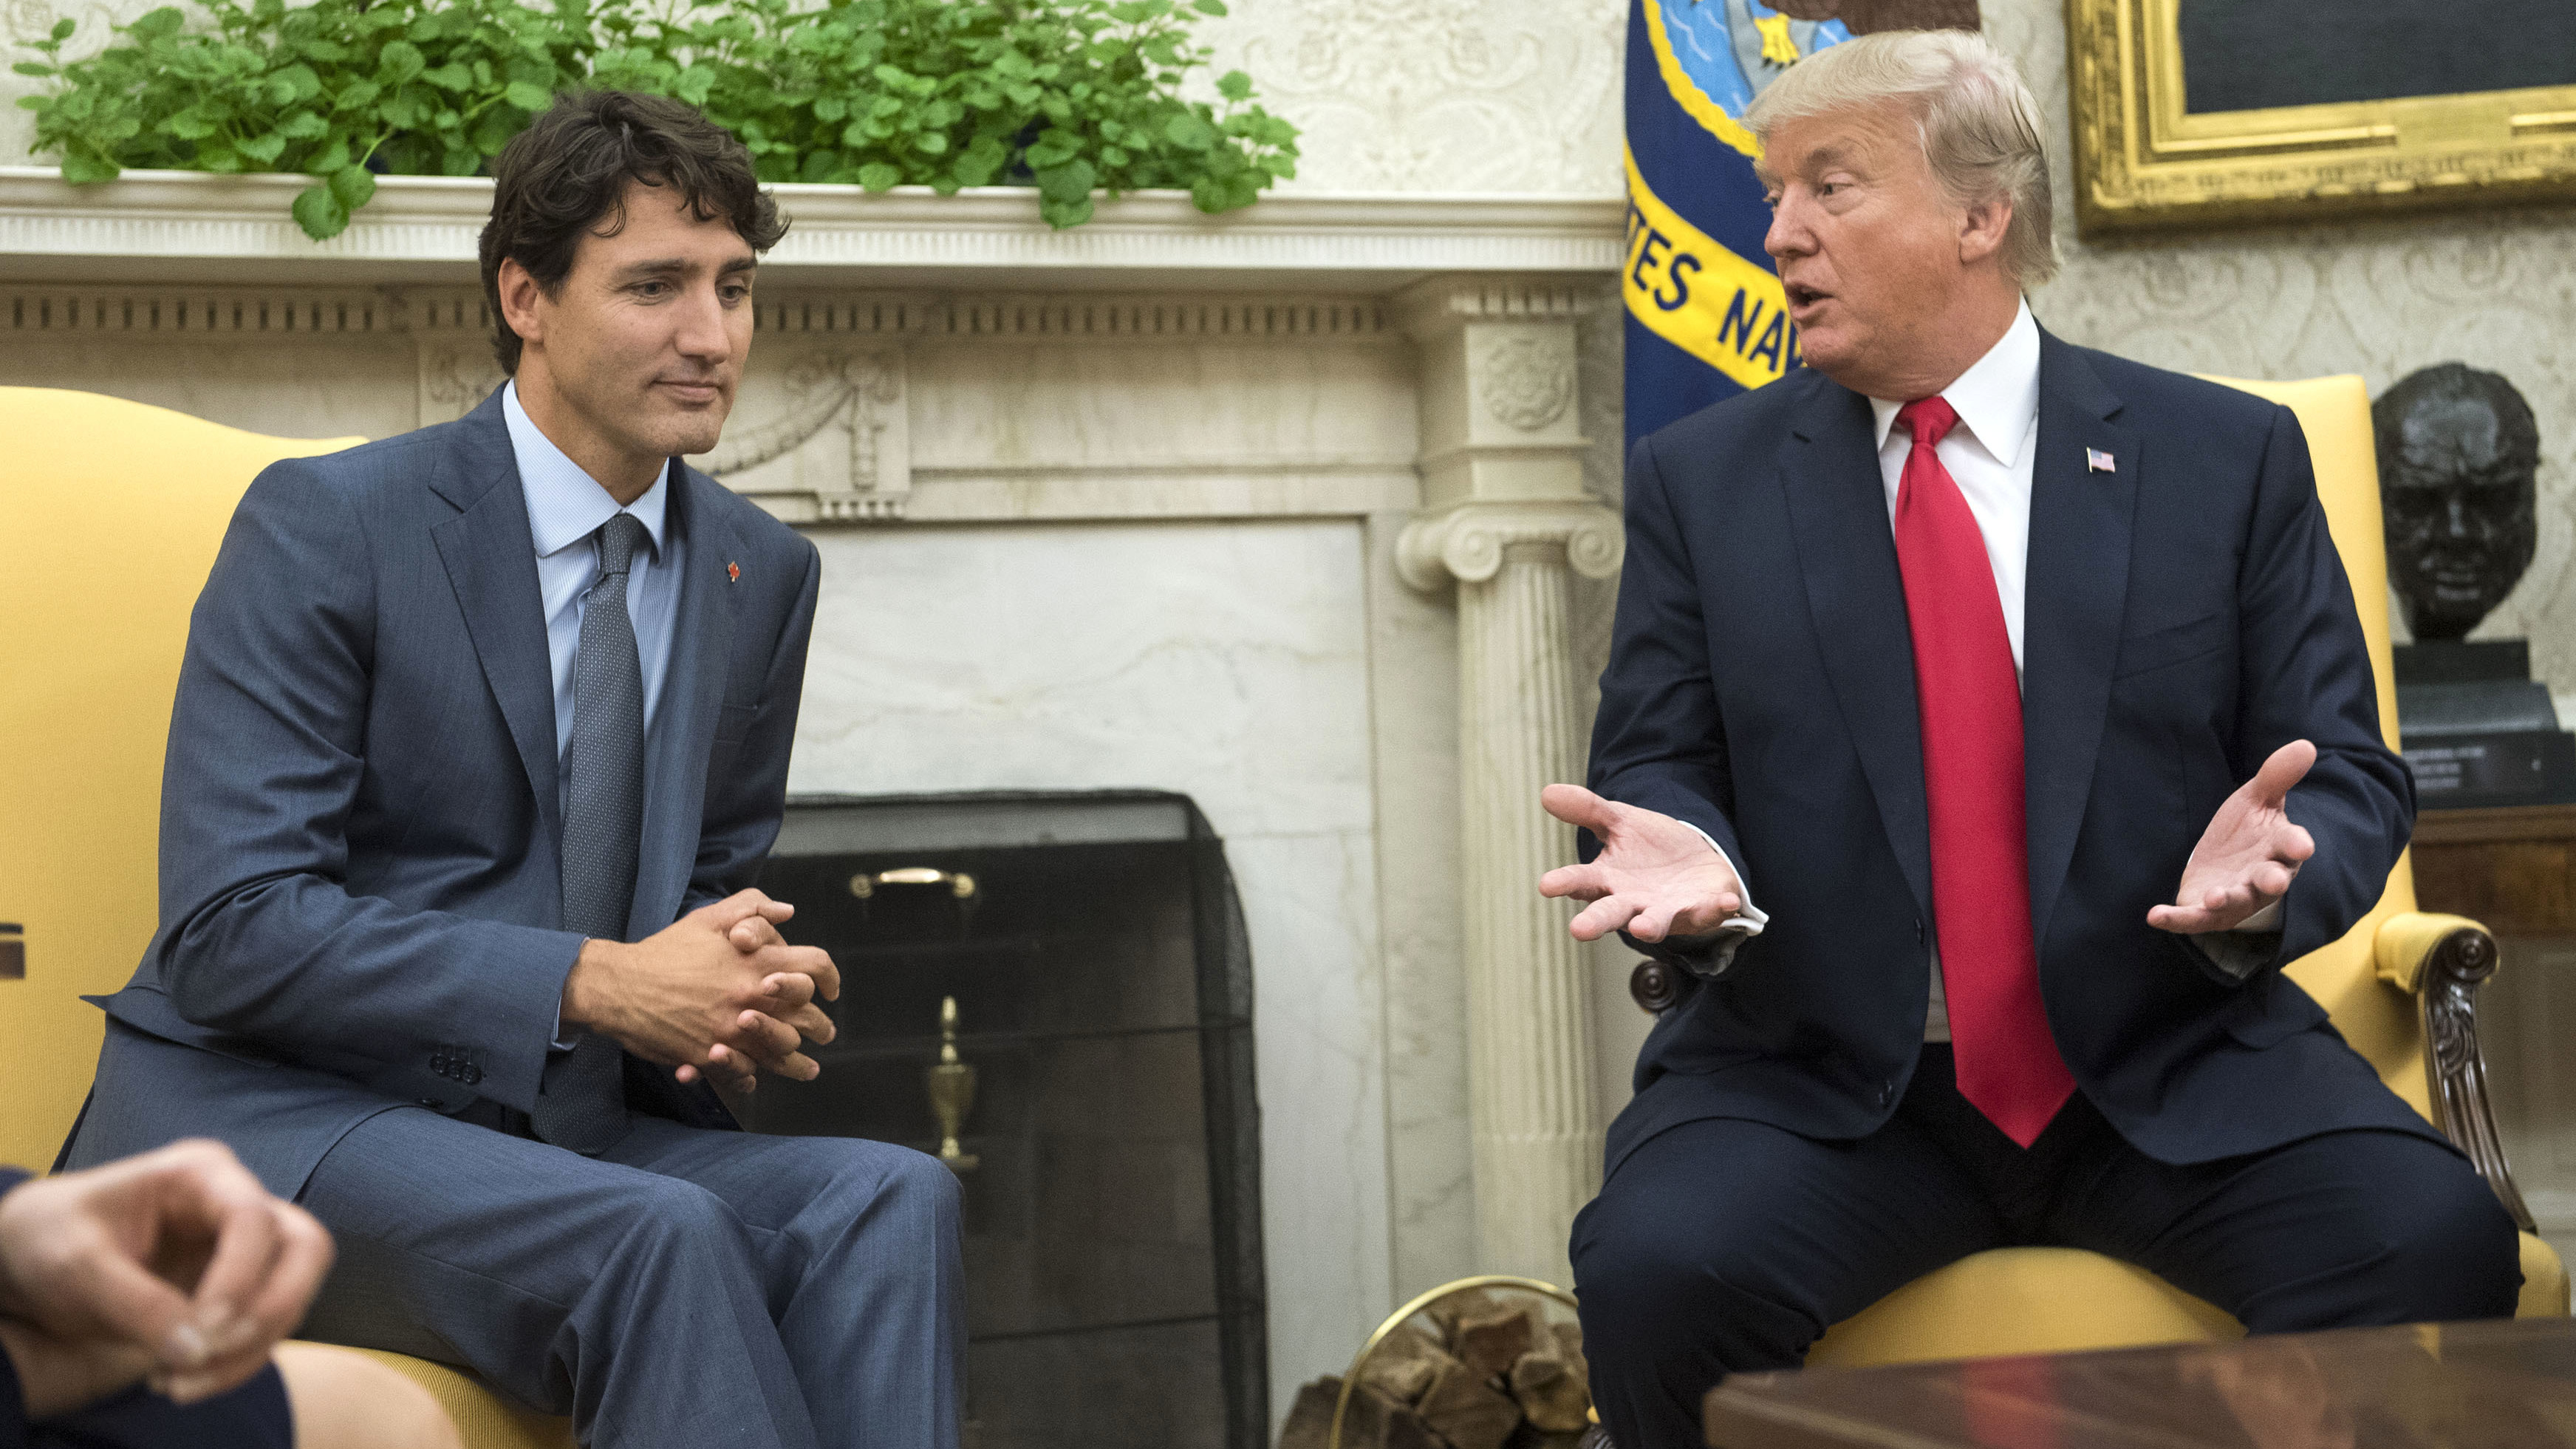 President Trump speaks alongside Canadian Prime Minister Justin Trudeau during a meeting in the Oval Office at the White House in October.
